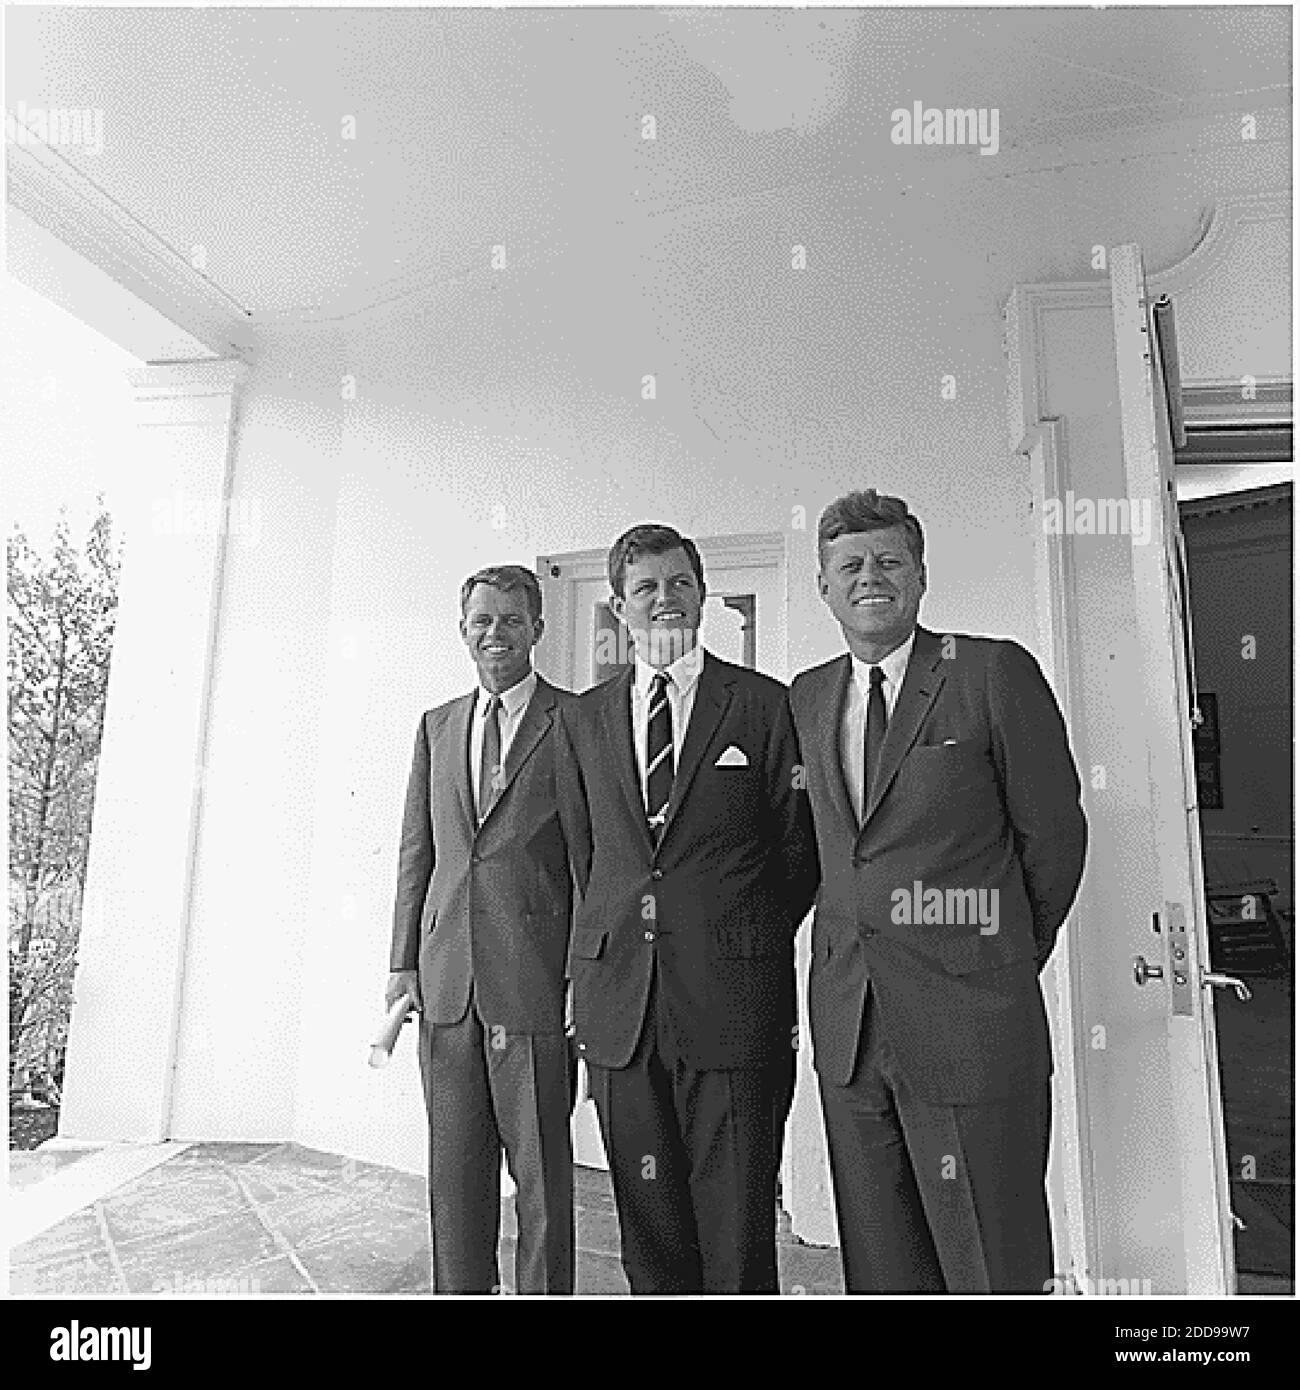 NO FILM, NO VIDEO, NO TV, NO DOCUMENTARY - President John F. Kennedy, right, stands with his brothers, Sen. Edward Kennedy (D-Mass), center and Attorney General Robert F, Kennedy outside the Oval Office at the White House in Washington, D.C., August 28, 1963. Photo by Handout/MCT/ABACAPRESS.COM Stock Photo